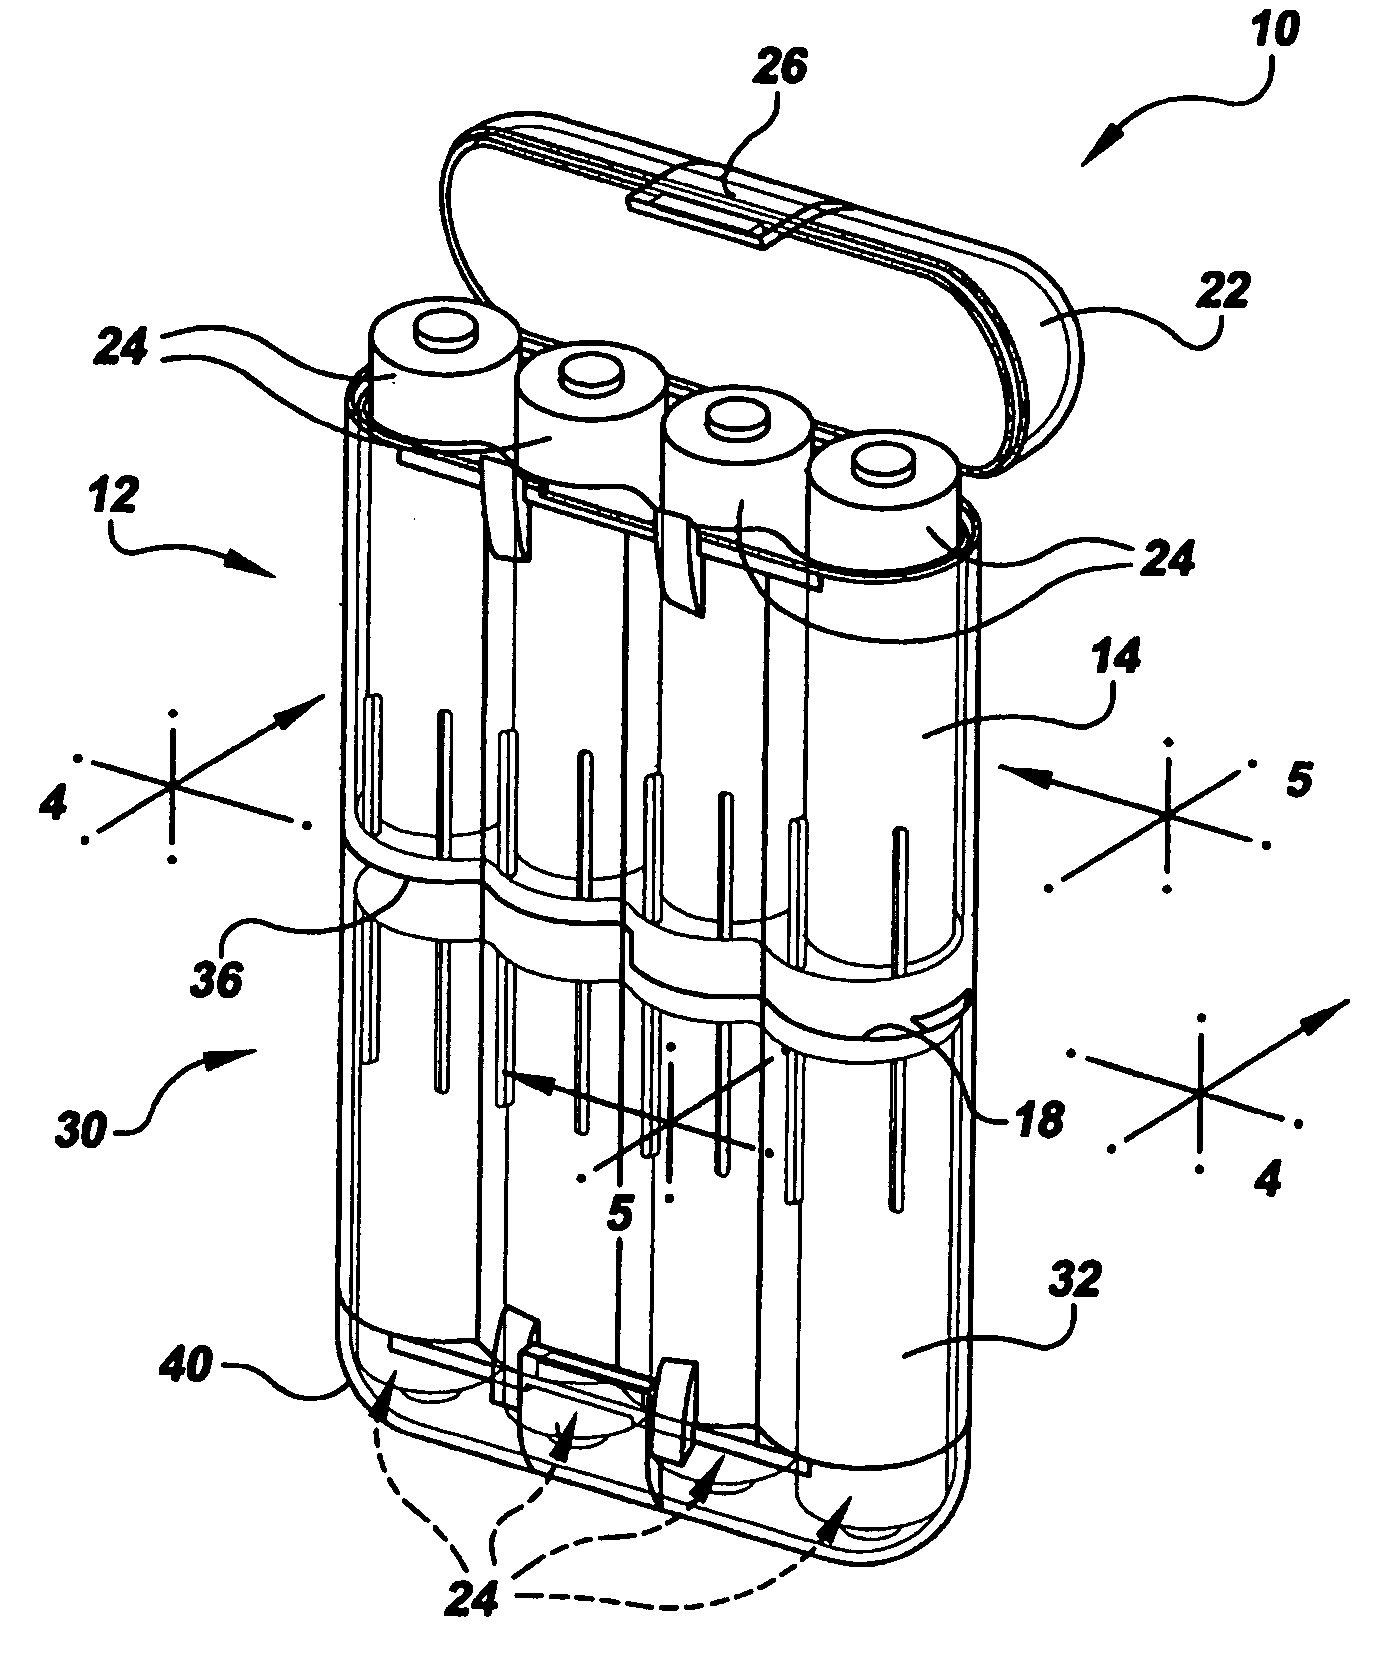 Battery tube storage system, system container, and container latch-lock